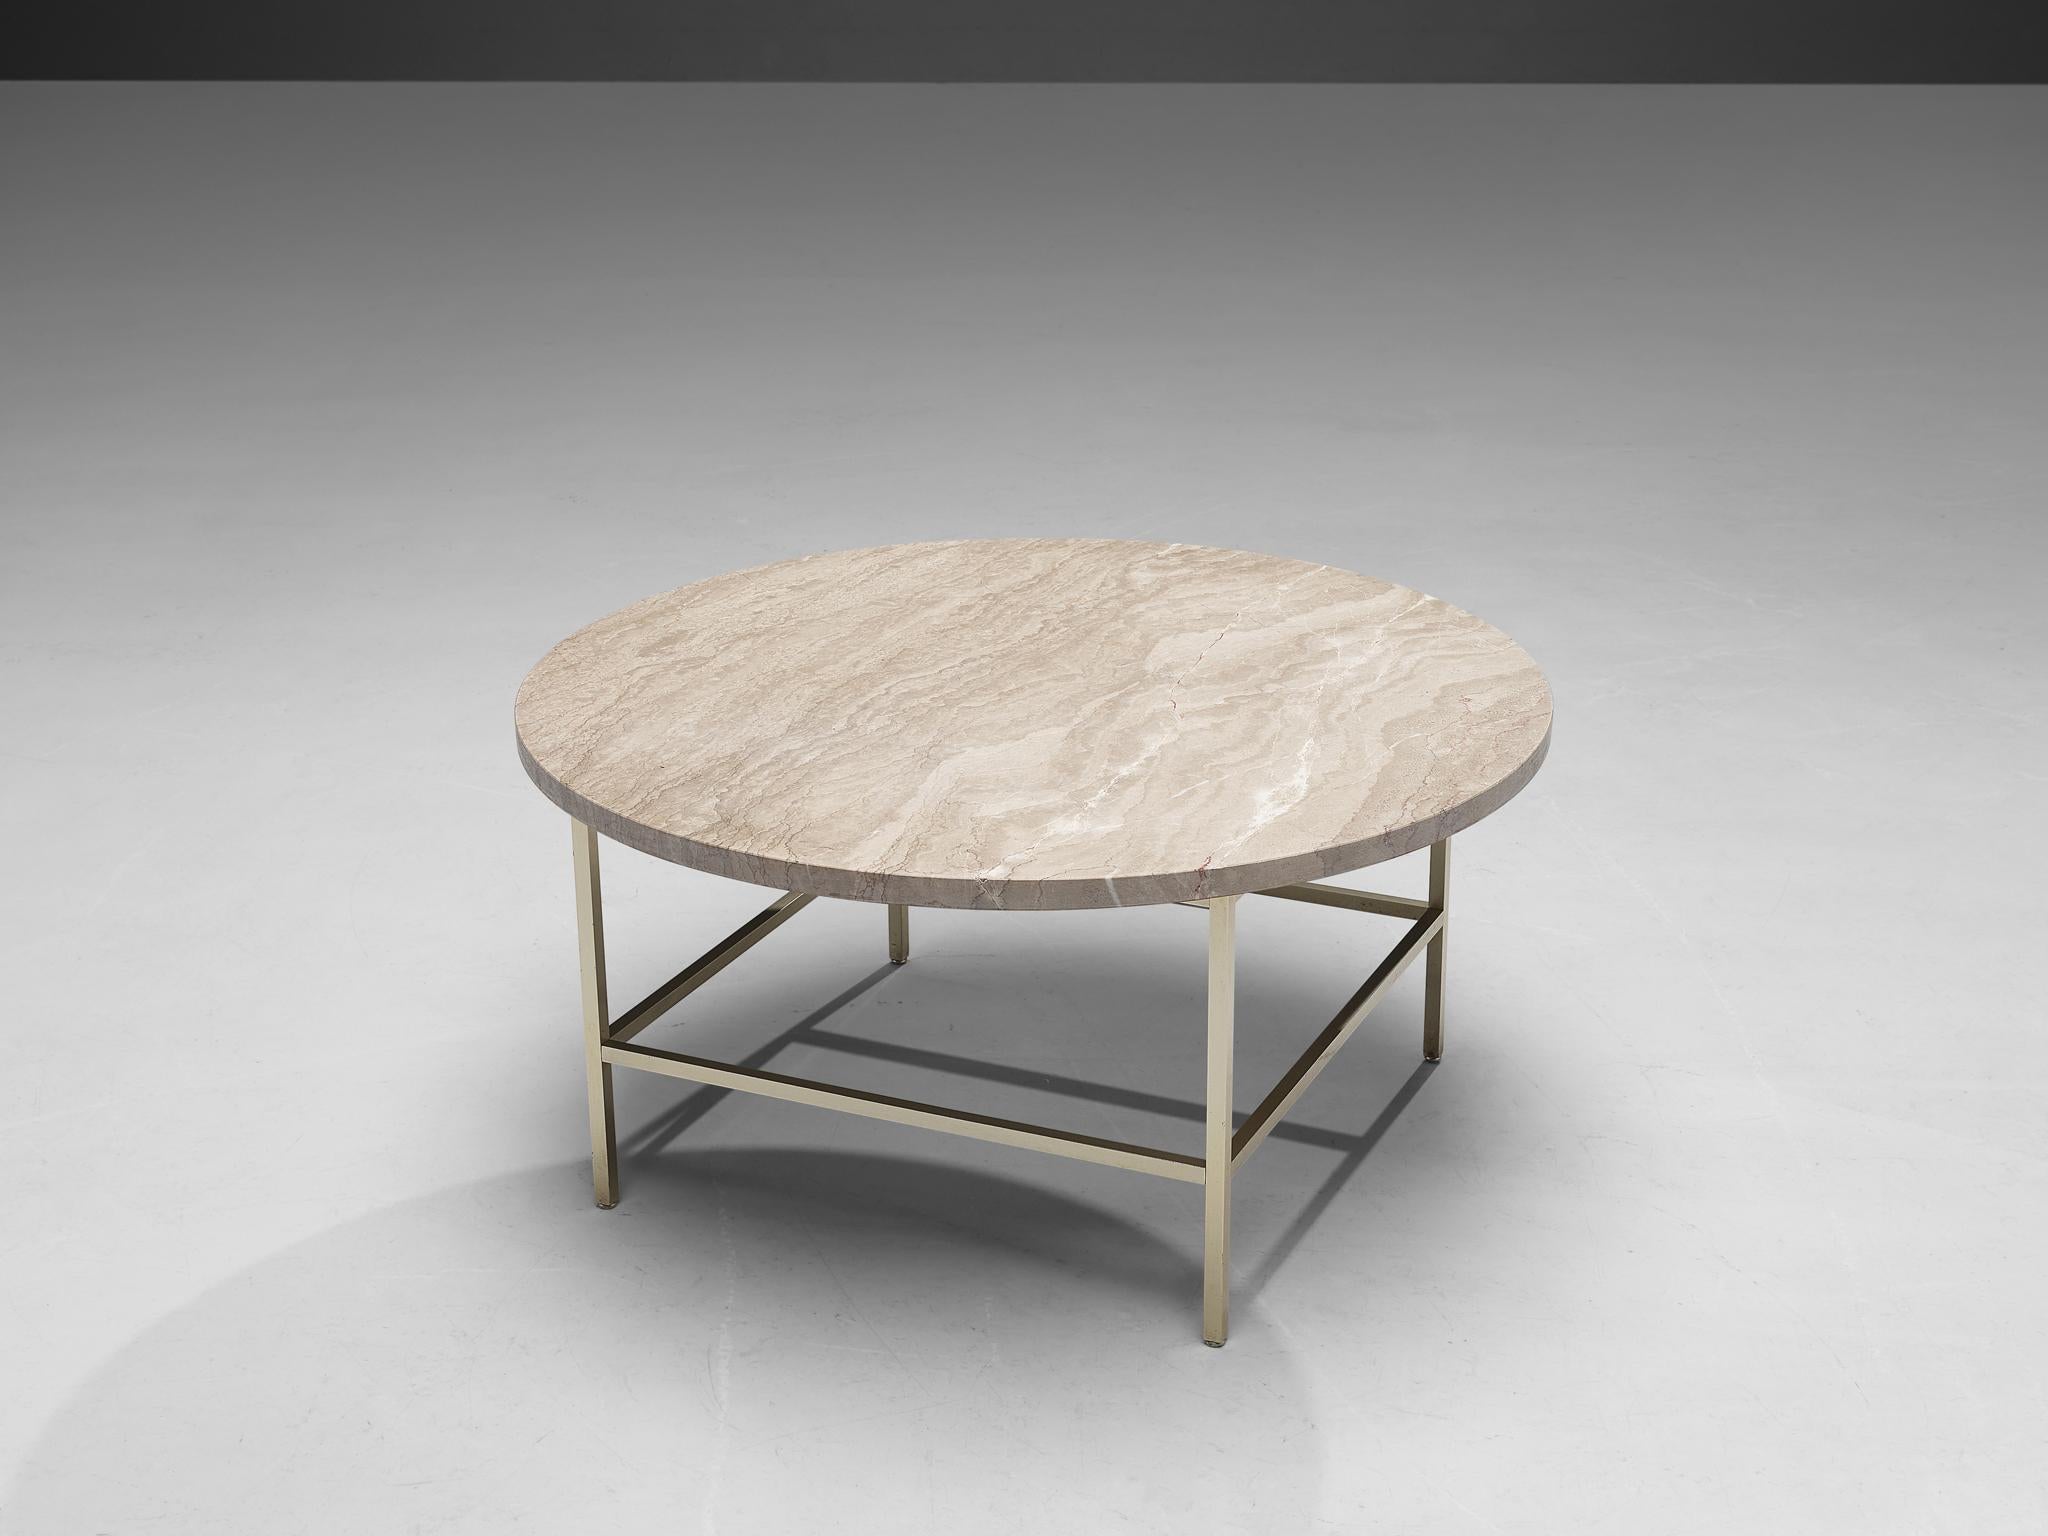 Round coffee table, marble, metal, United States, 1950s

This modest side table radiates pure elegance and strongly resembles designs of Paul McCobb. The table features a round beige marble top and is architectural in its structure. The table rests